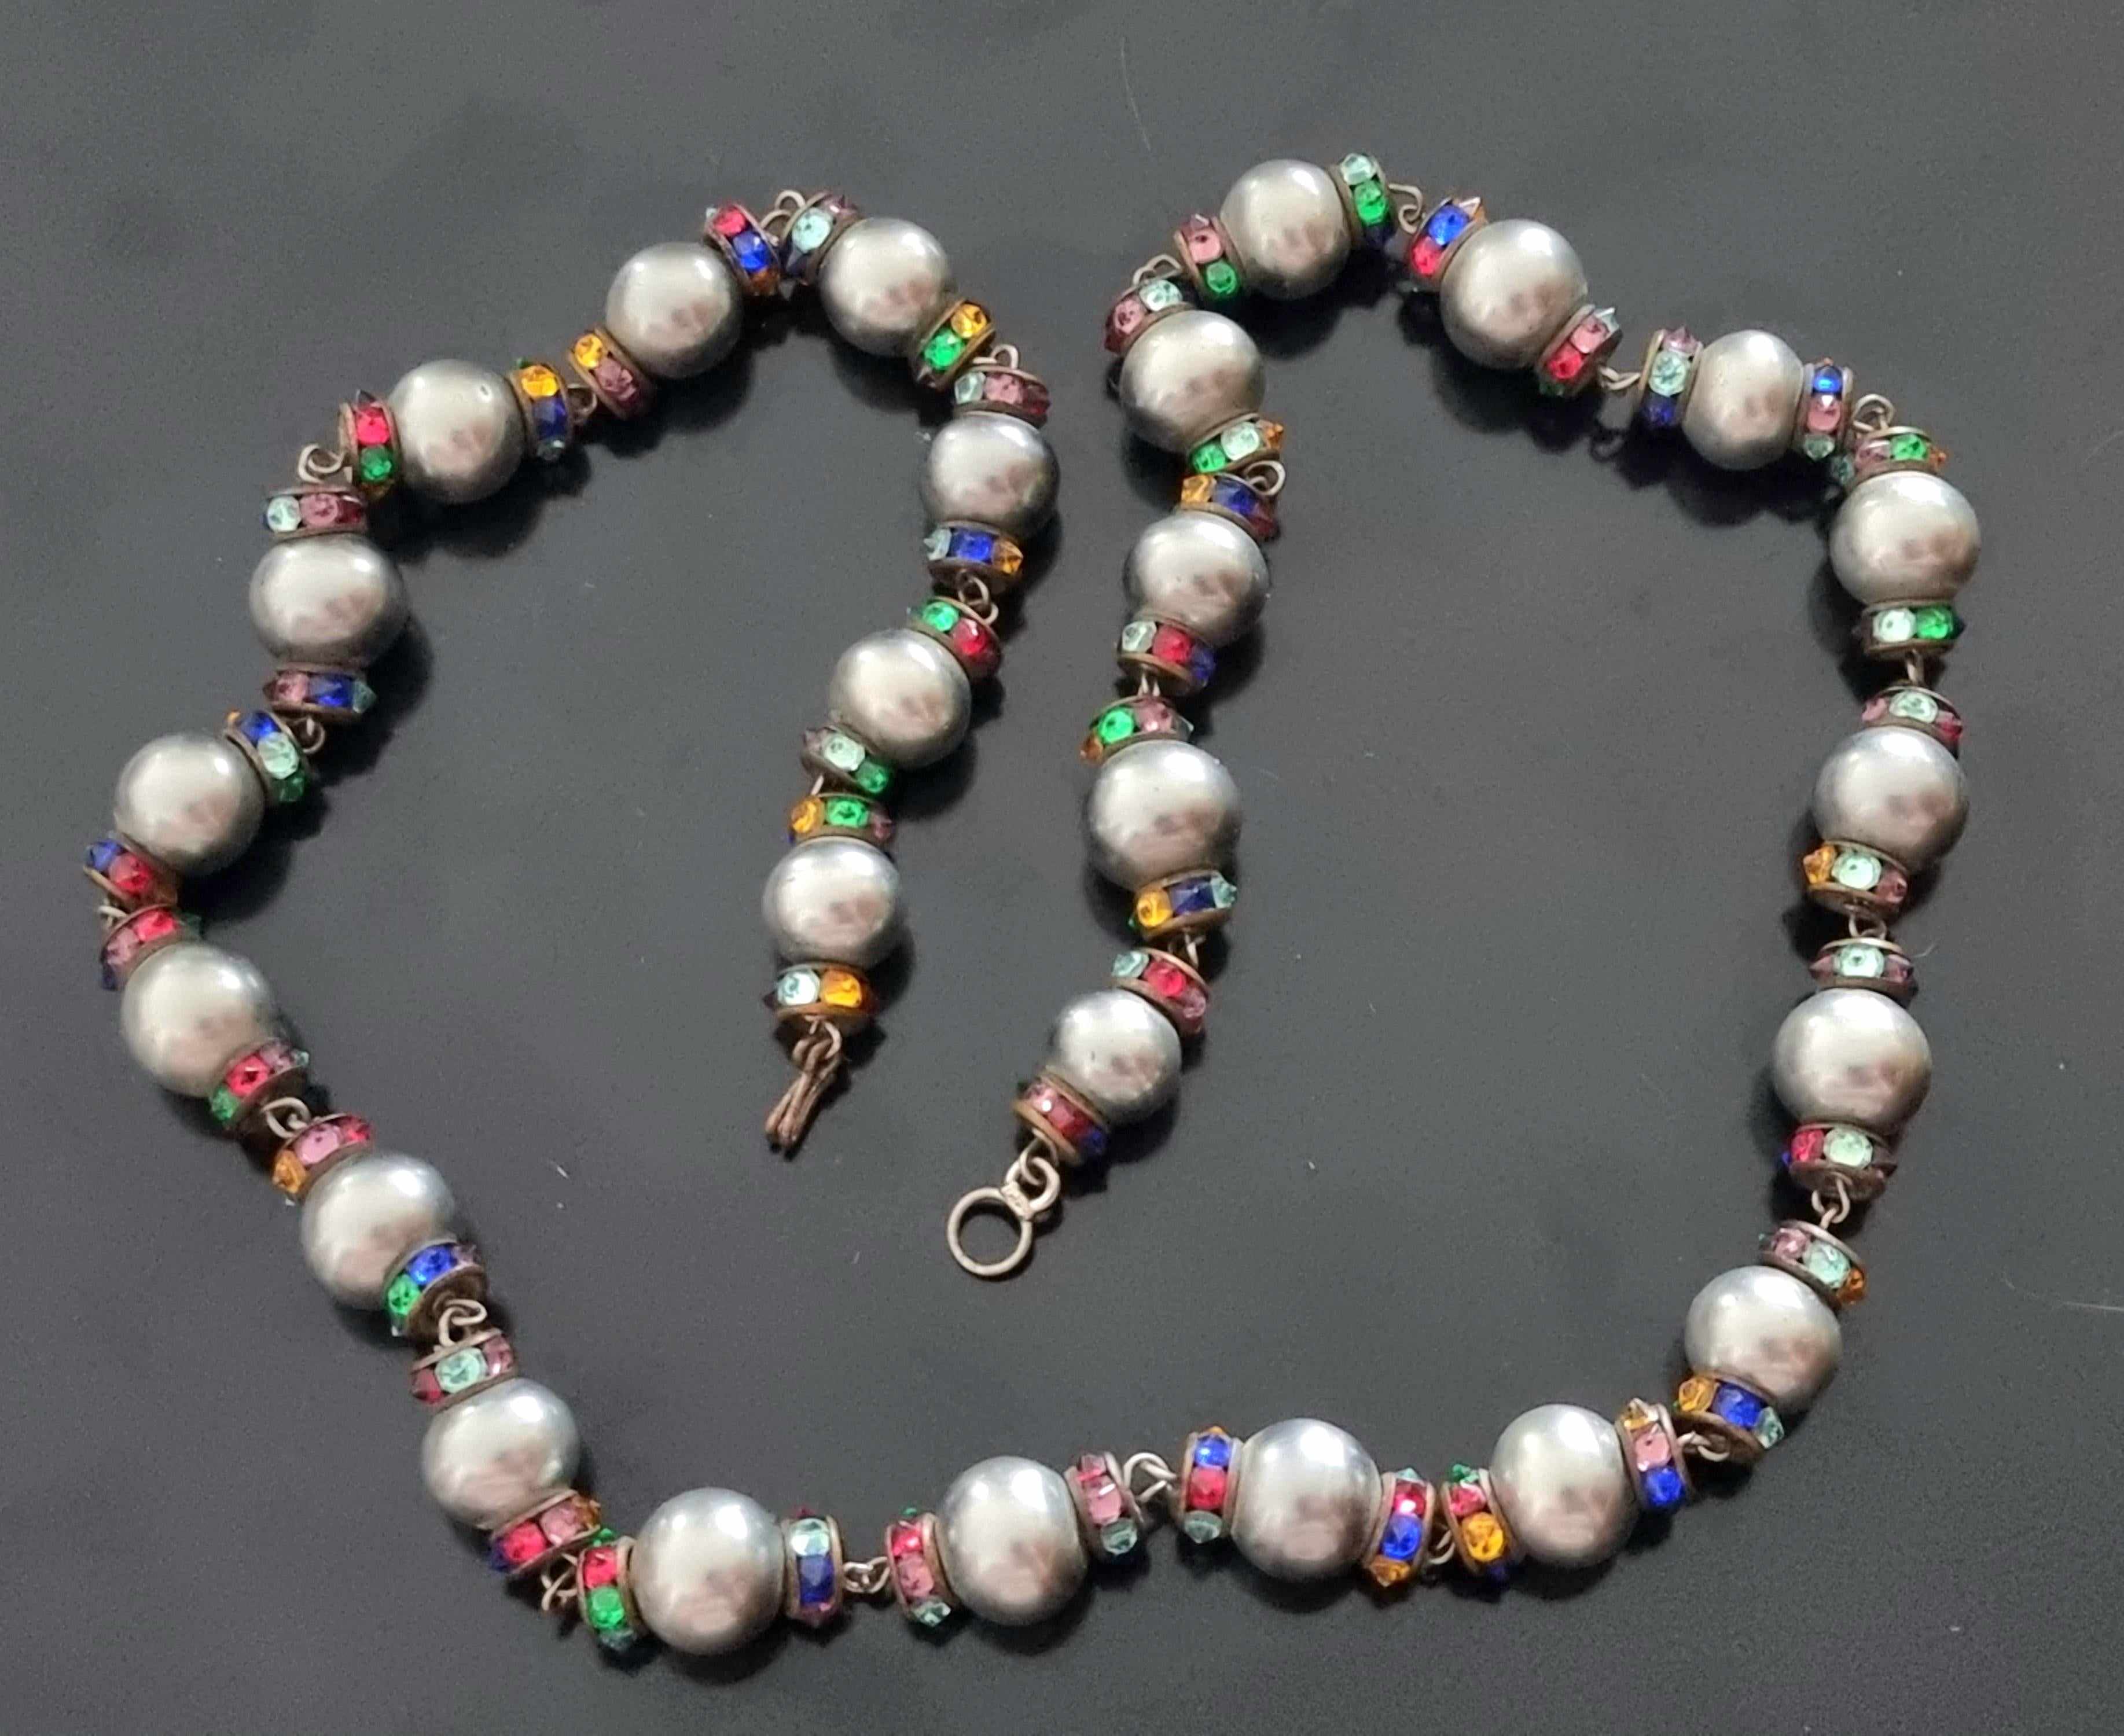 Old CHANEL necklace,
40s vintage,
composed of Louis Rousselet pearls, rhinestones,
length 48 cm, weight 53 g,
good condition.

A child of Ménilmontant and the popular suburbs of Paris, Louis Rousselet was born in 1892 and shared his first class